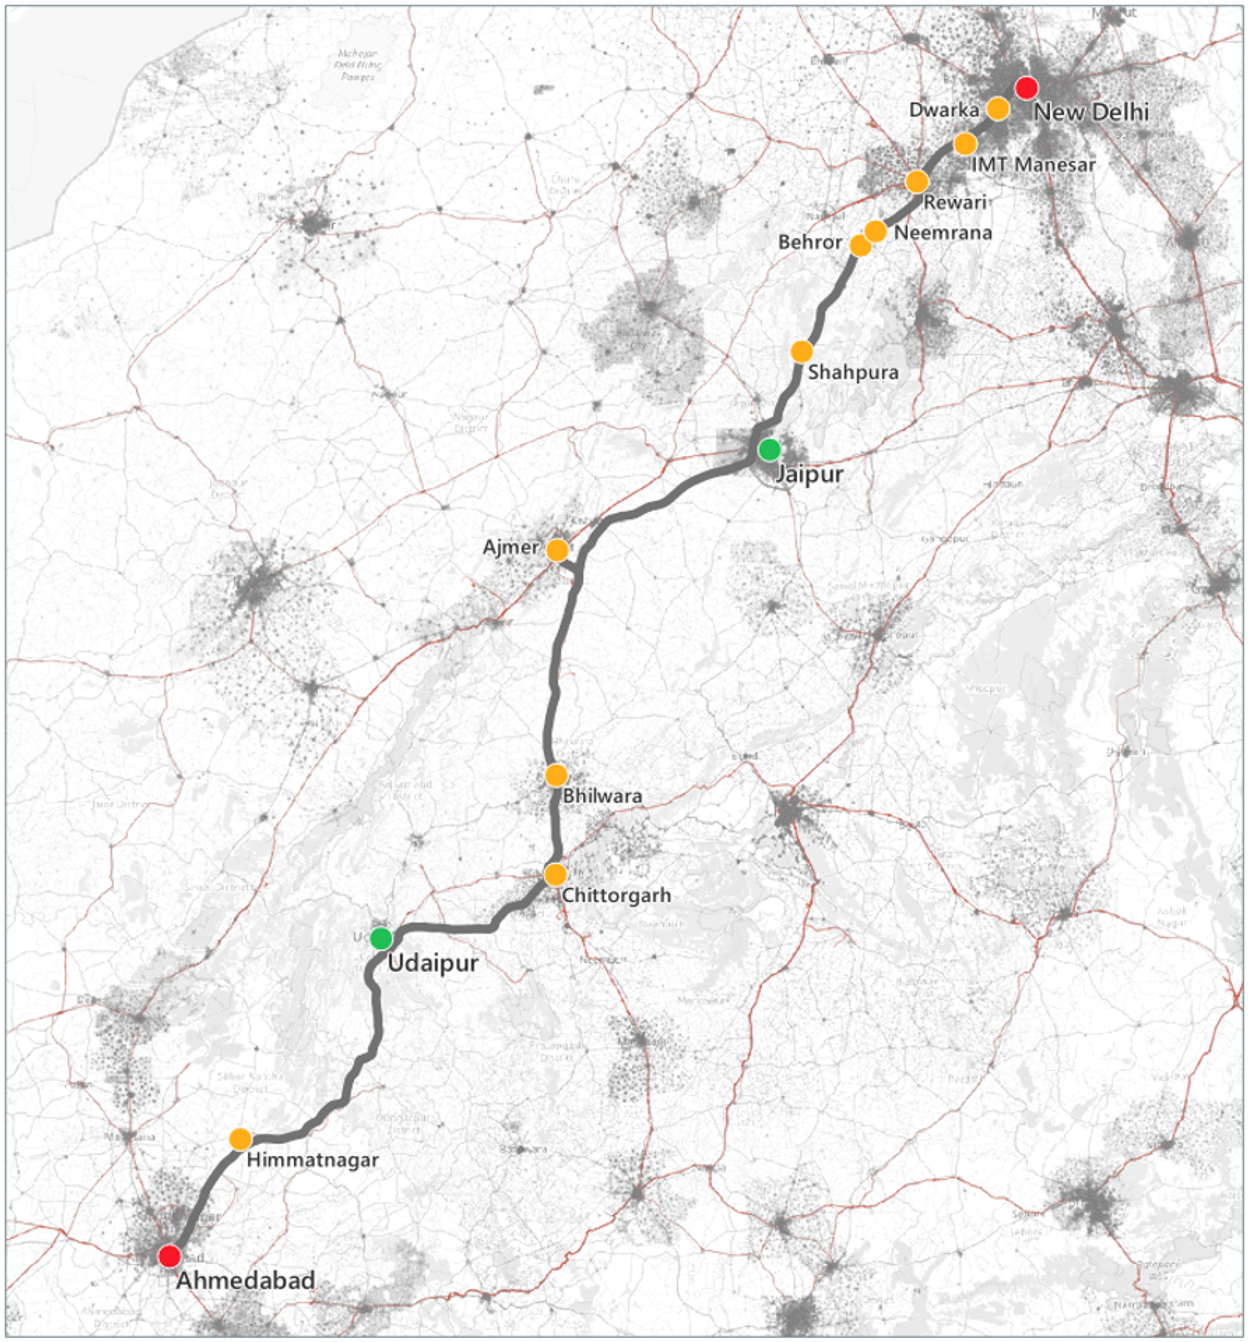 Three different proposed route. Route 1: red dots. Route 2: green and red dots. Route 3: all dots.